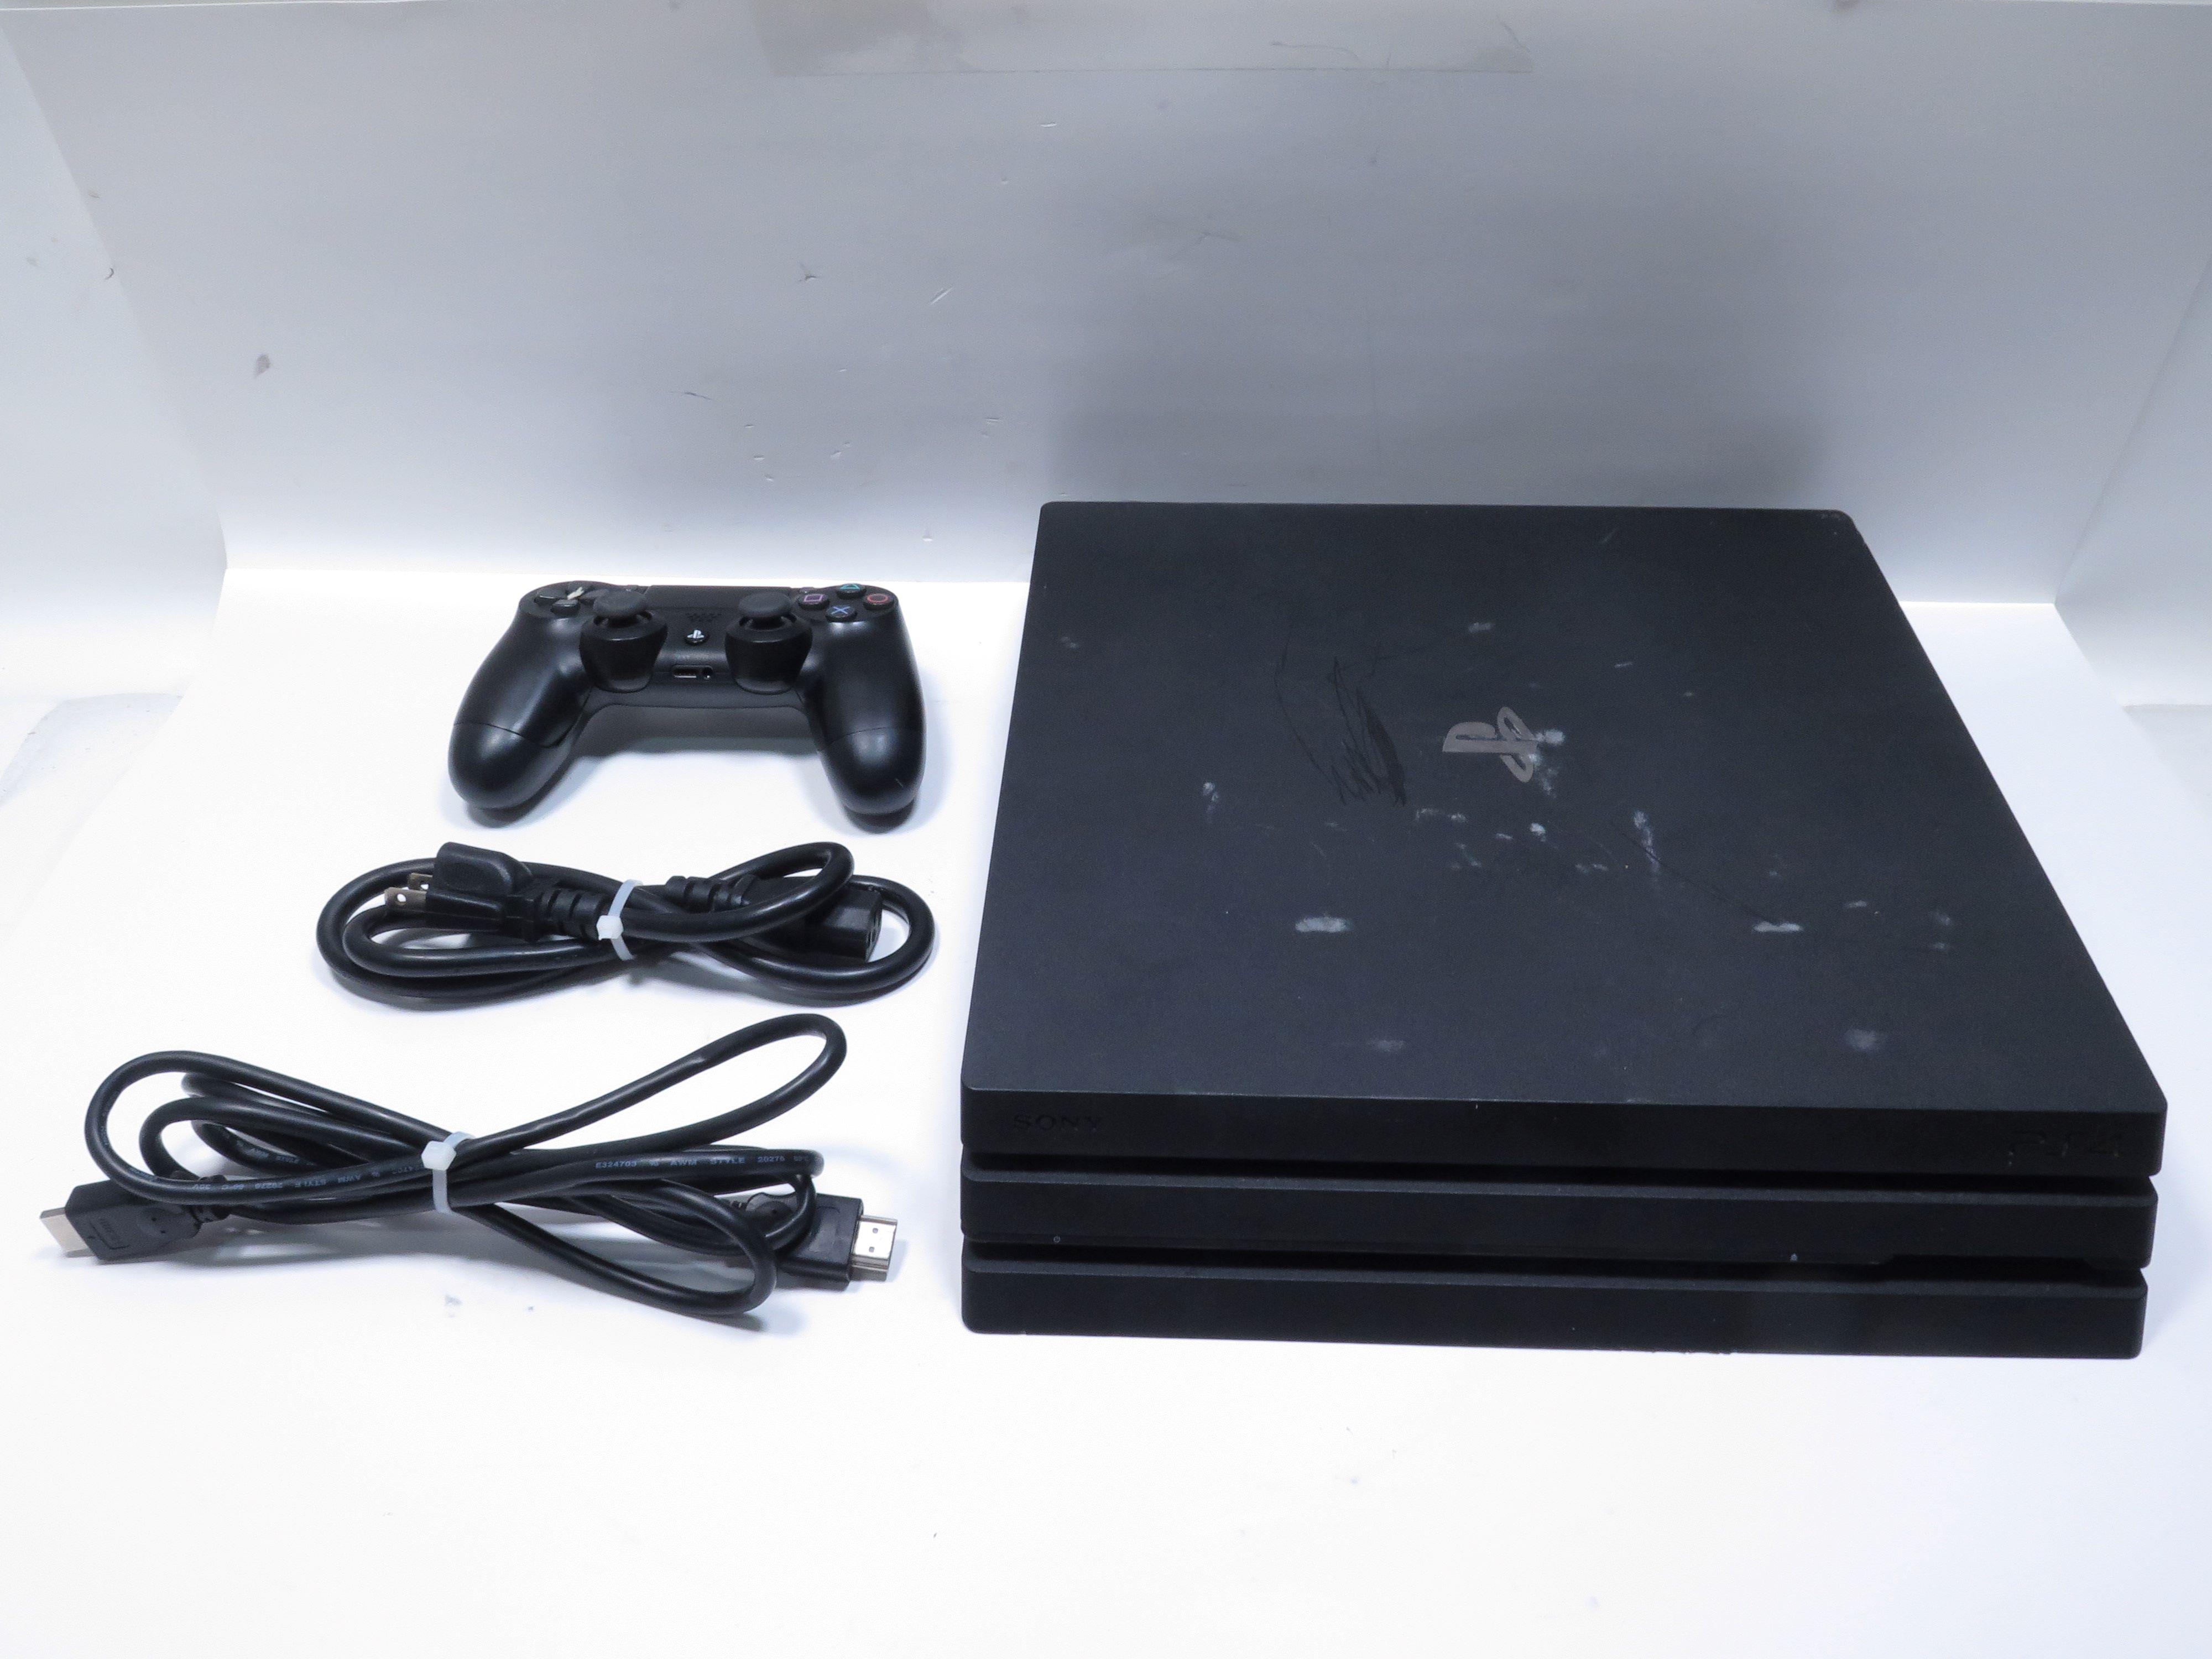 Sony PlayStation 4 PRO 1TB Gaming Console Black, HDMI Cable With Cleaning  Kit Like New